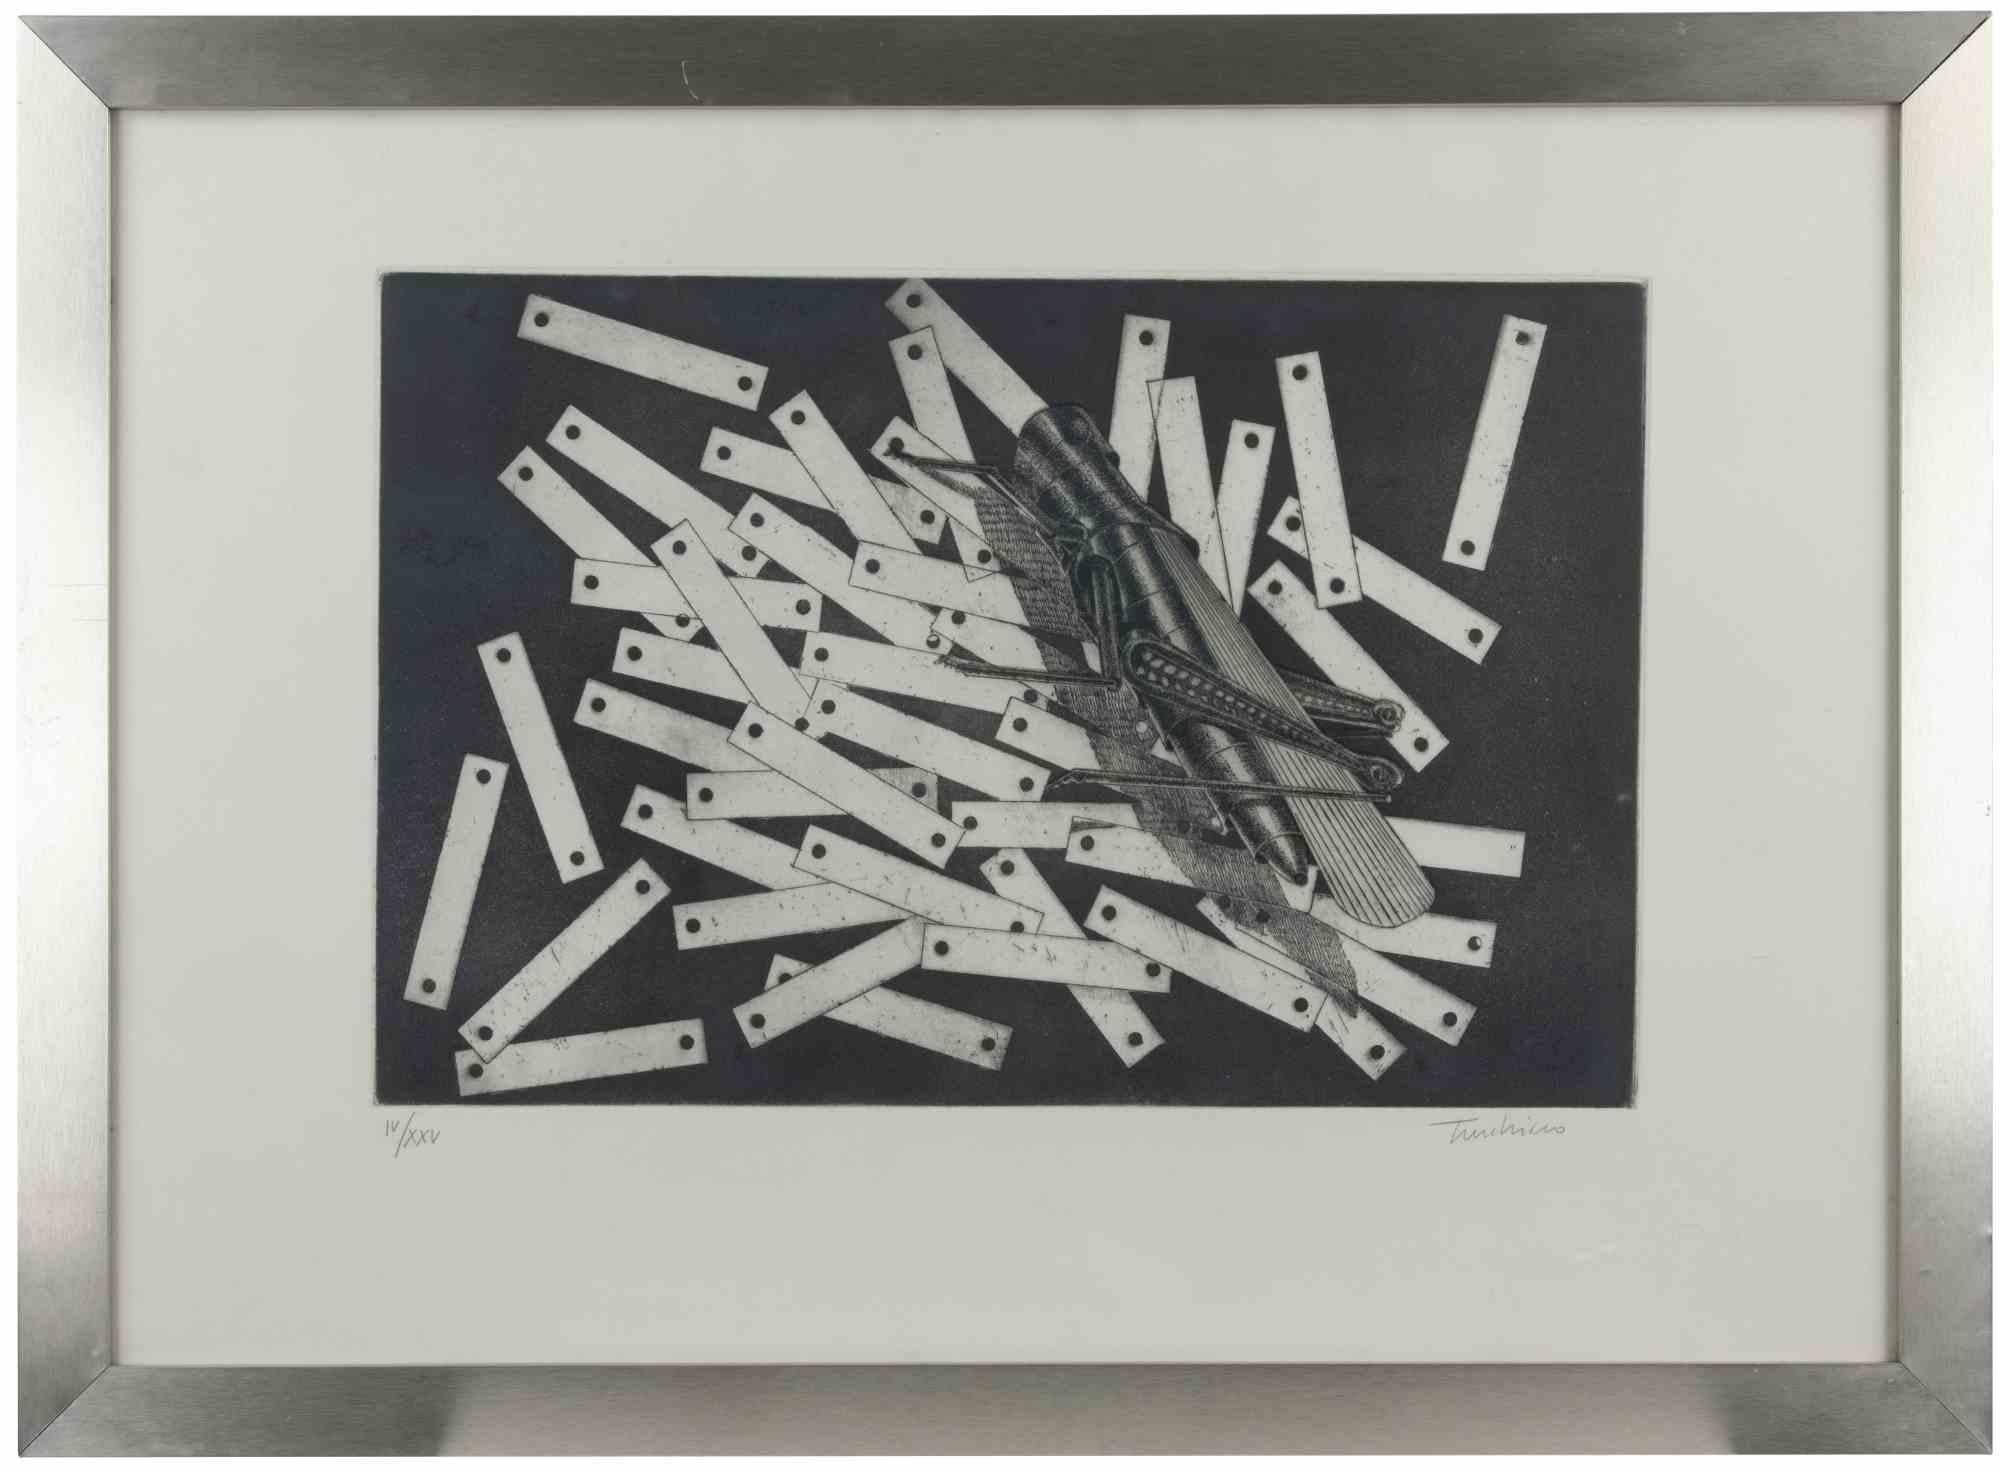 Untitled is a modern artwork realized by Aldo Turchiaro.

Black and white etching.

Hand signed and numbered on the lower margin.

Edition of IV/XXV

Includes frame.